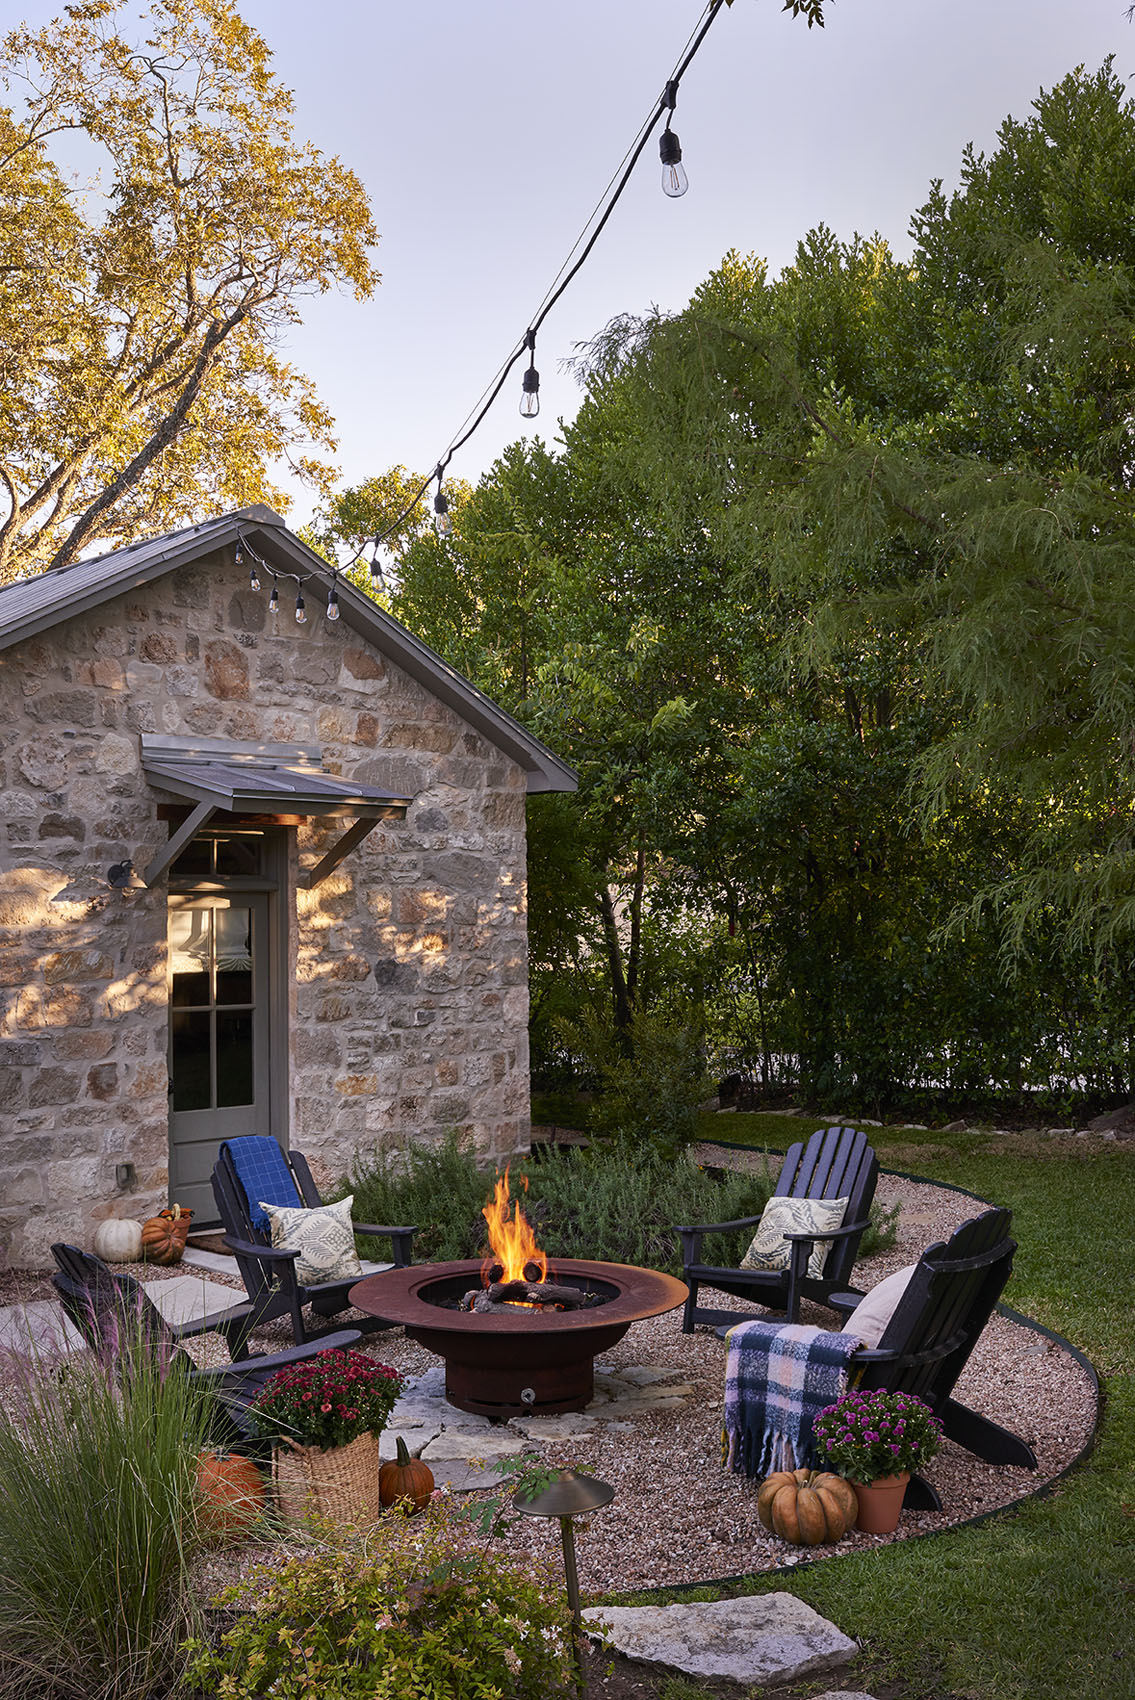 Autumn evening around outdoor campfire in Southern Living Magazine in Fredericksburg Texas by Alison Gootee Photography